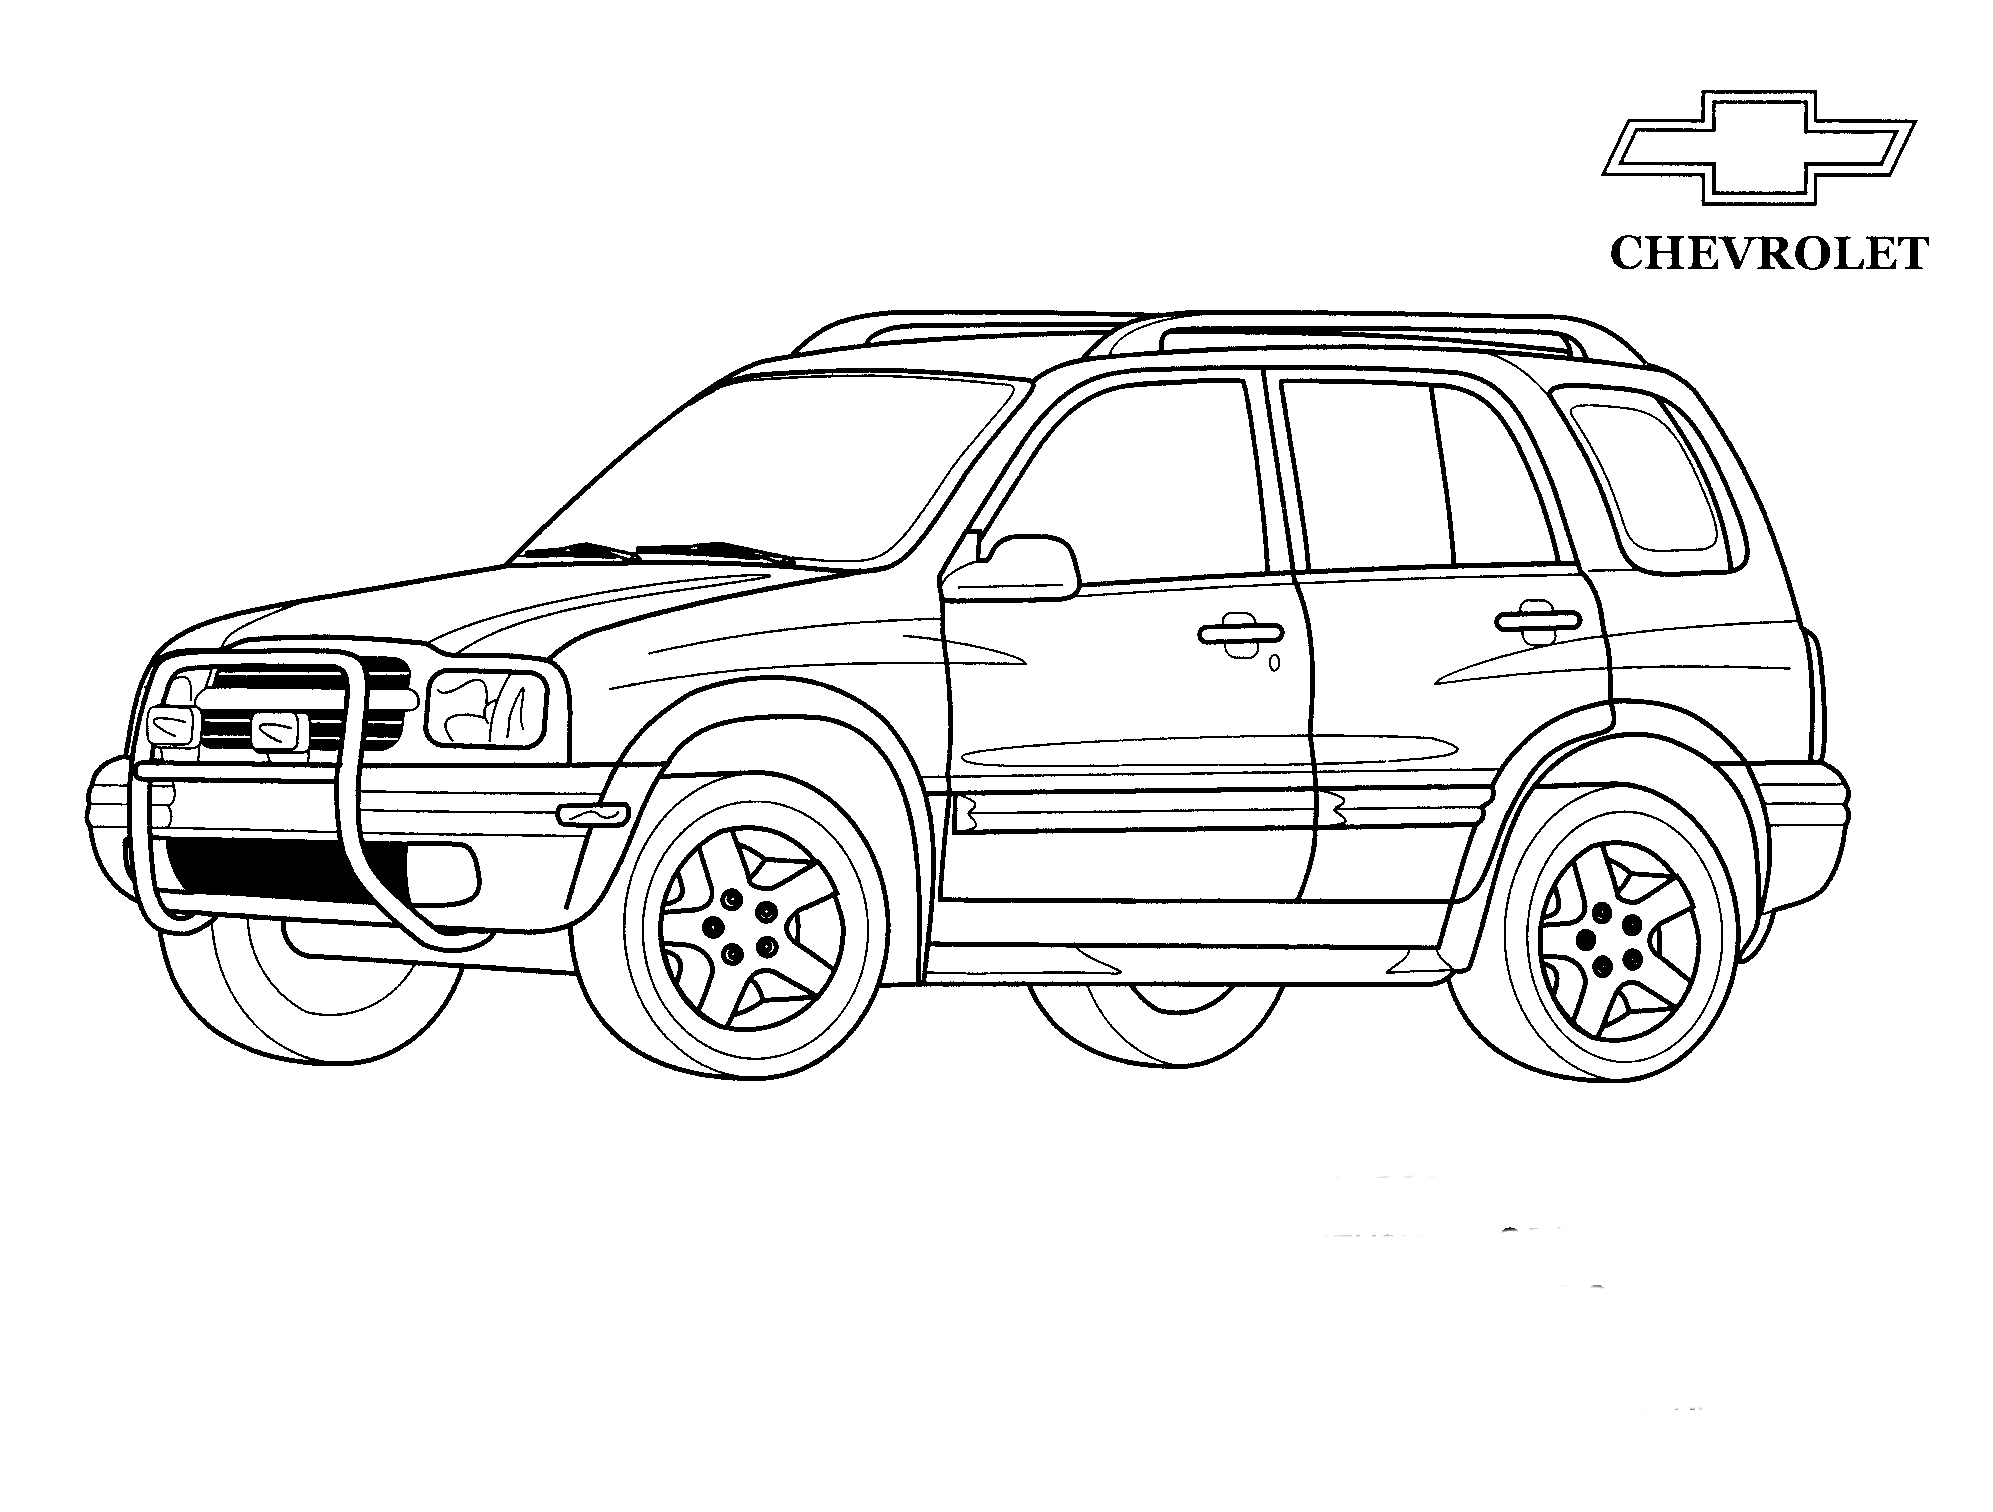 Coloring page - Jeep Chevrolet